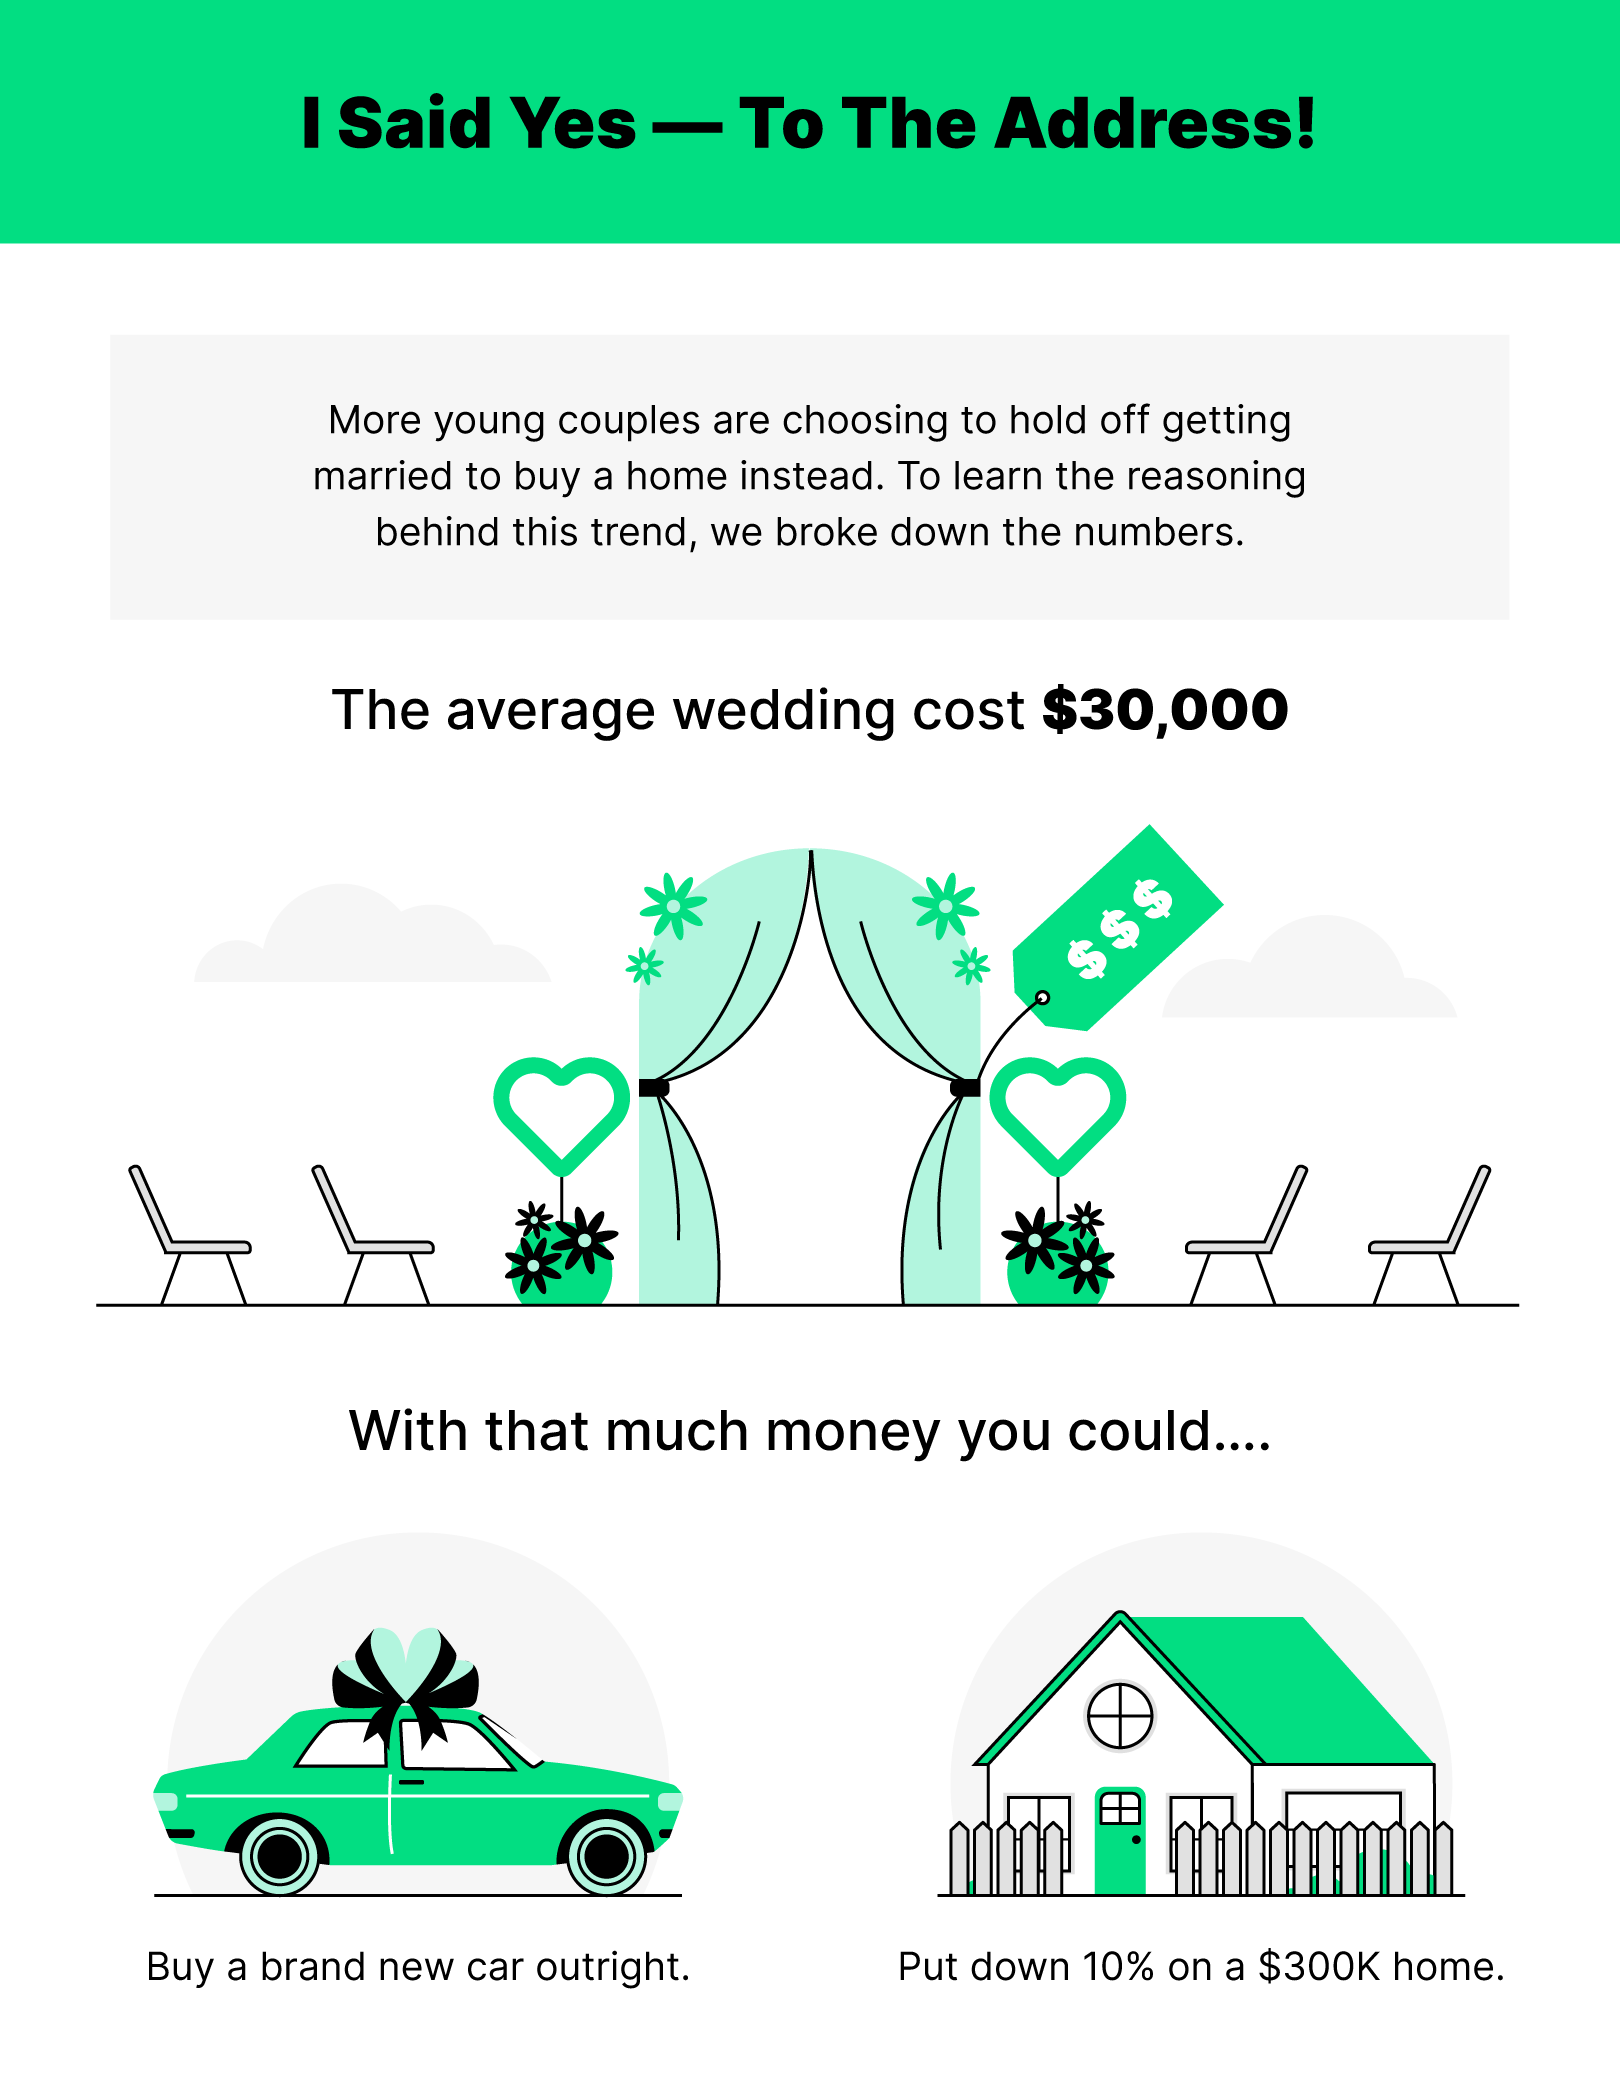 Graphic with green, black and white illustrations of a wedding arch, a car and a house